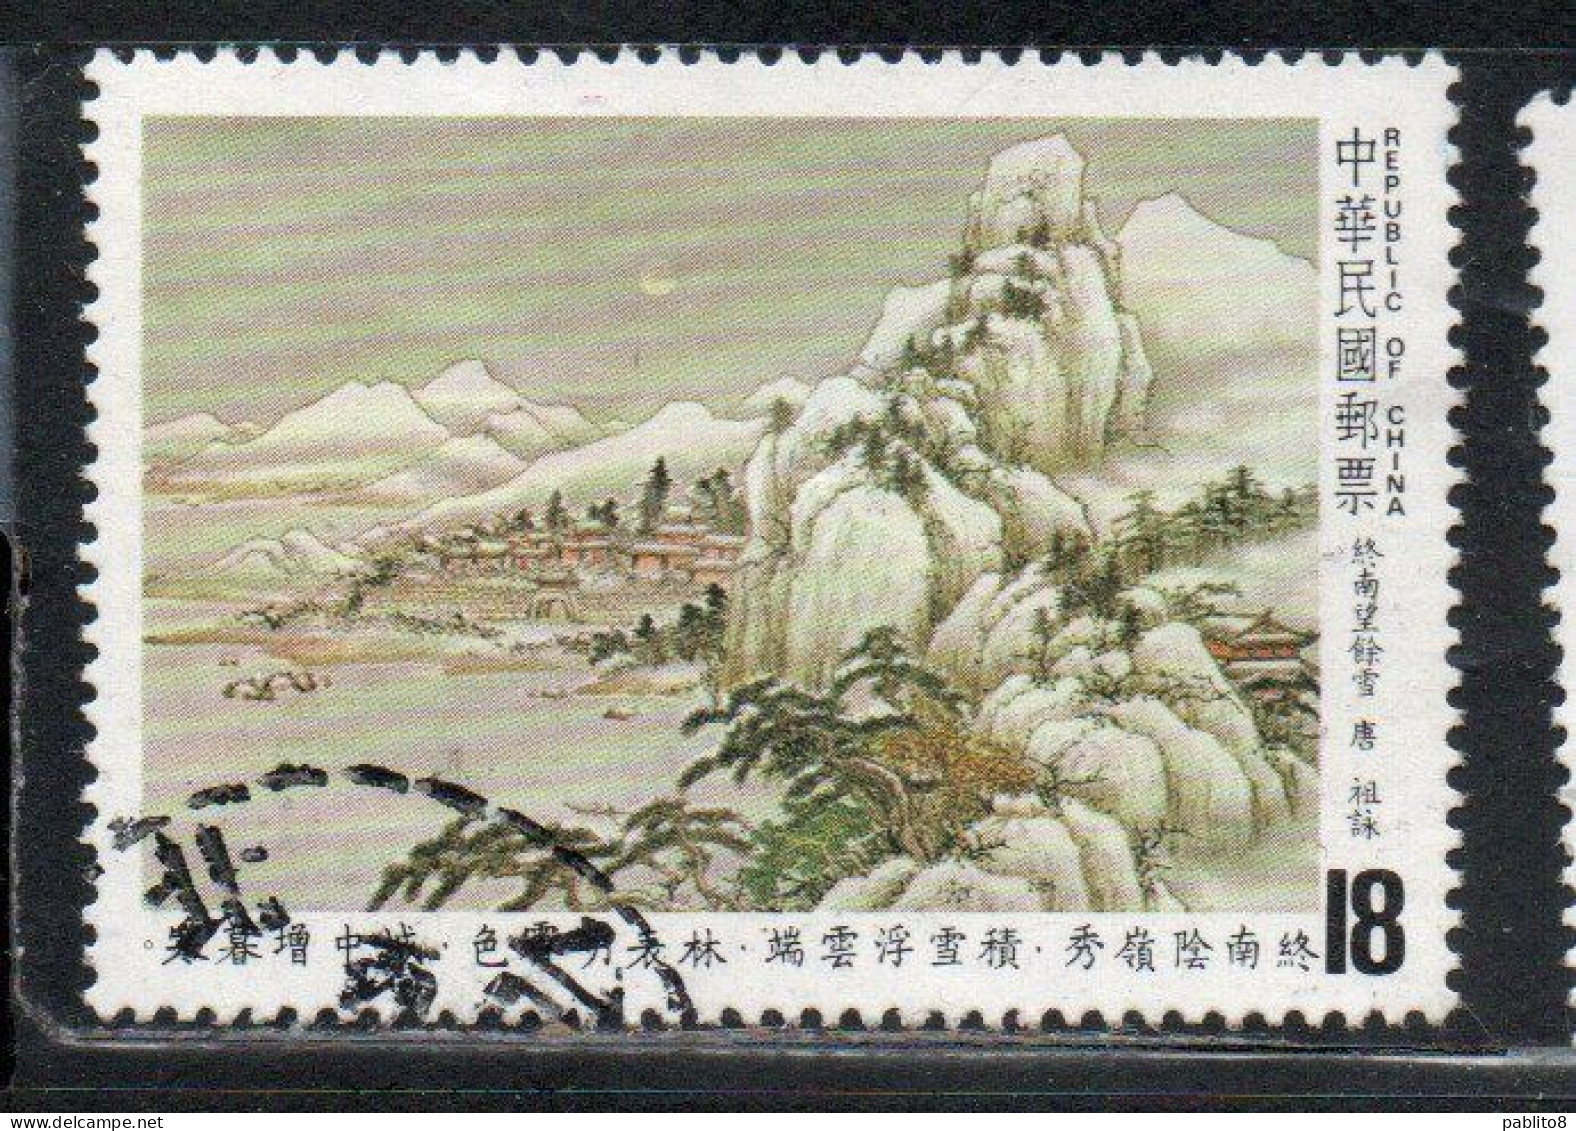 CHINA REPUBLIC CINA TAIWAN FORMOSA 1982 TANG DINASTY POETRY ILLUSTRATION LOOKING AT SNOW DRITTS 18$ USED USATO OBLITERE' - Gebraucht